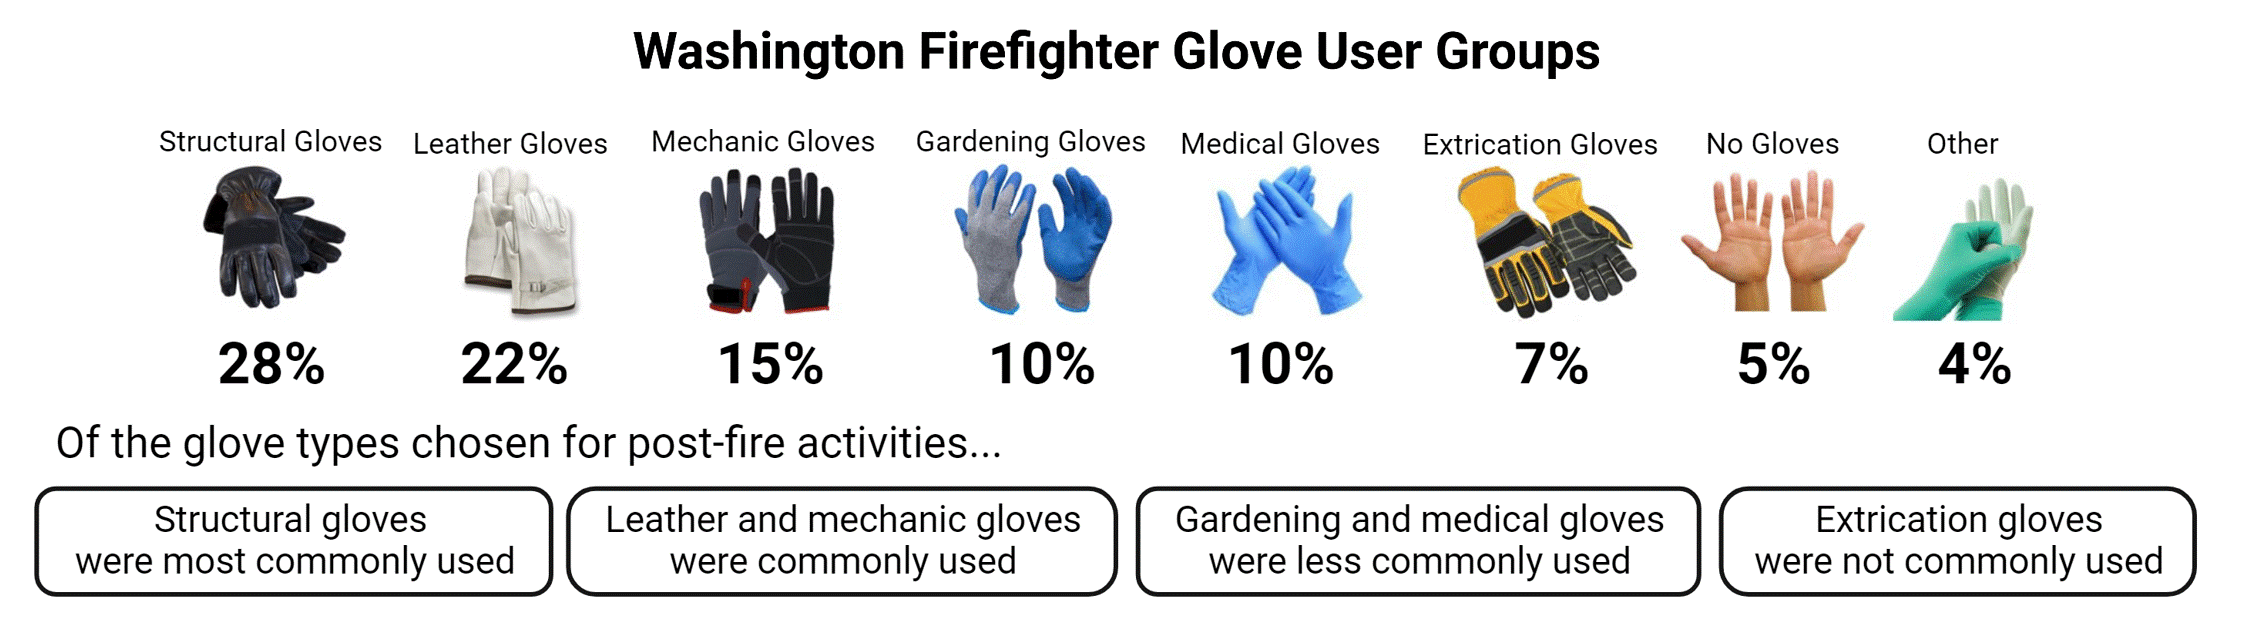 Text: Washington Firefighter Glove Use Groups: Structural gloves, 28%; leather gloves, 22%; mechanic gloves, 15%; gardening gloves, 10%; medical gloves, 10%; extrication gloves, 7%; no gloves, 5%; other, 4%. Of the gloves chosen for post-fire activities...Structural gloves were most commonly used. Leather and mechanic gloves were commonly used. Gardening and medical gloves were less commonly used. Extrication gloves were not commonly used.